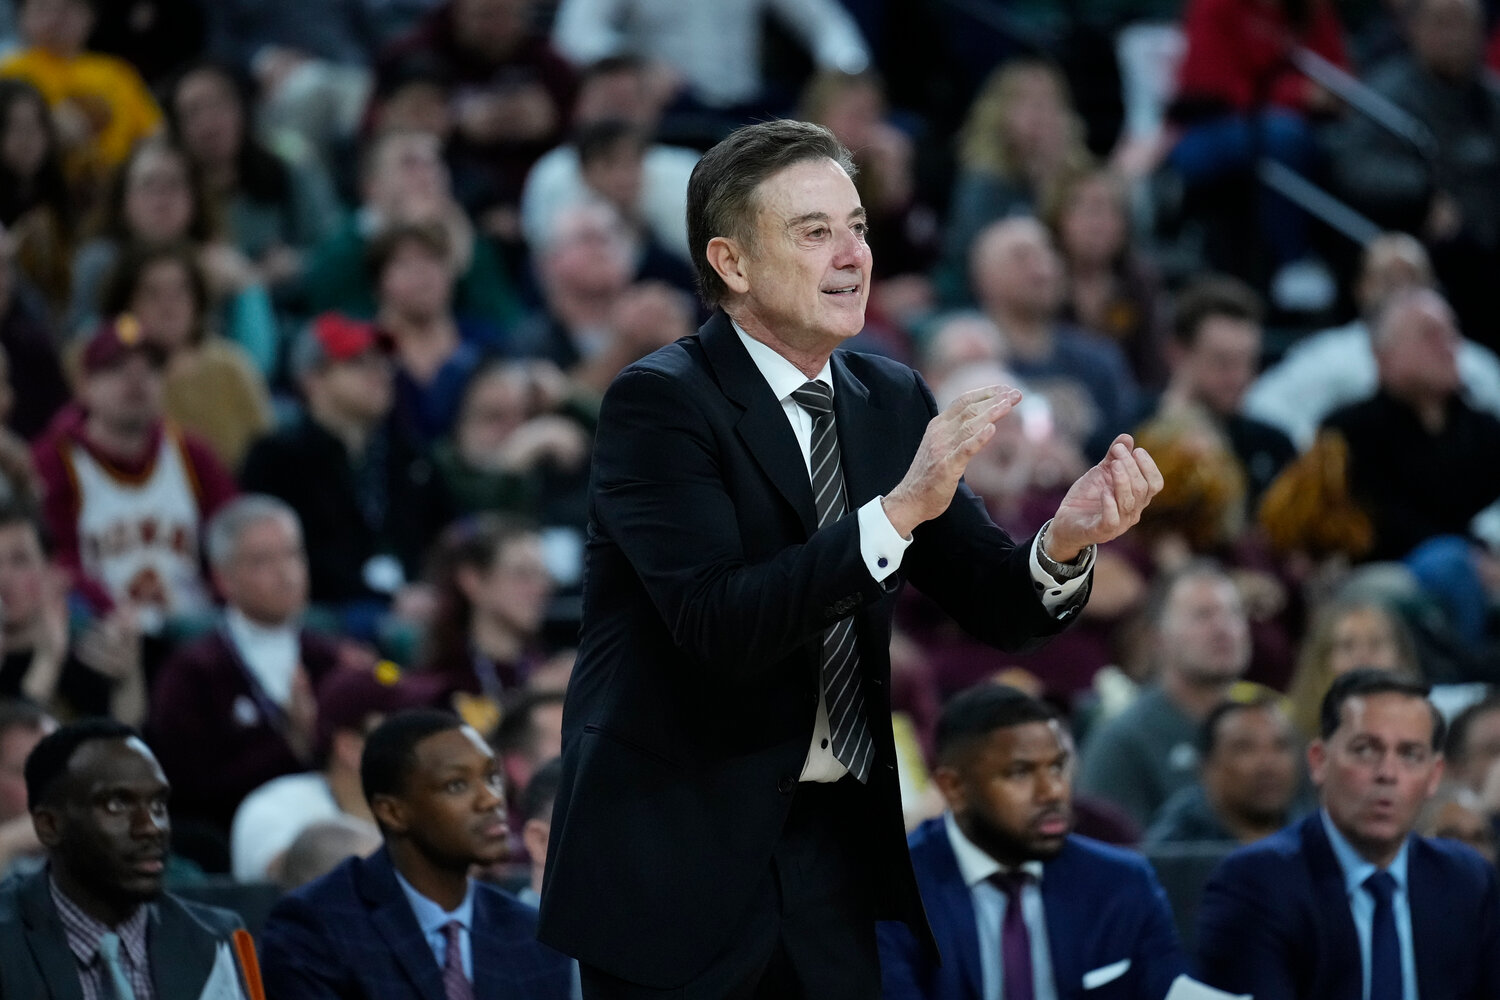 Iona head coach Rick Pitino reacts during the Metro Atlantic Athletic Conference Tournament championship against Marist on Saturday in Atlantic City N.J.